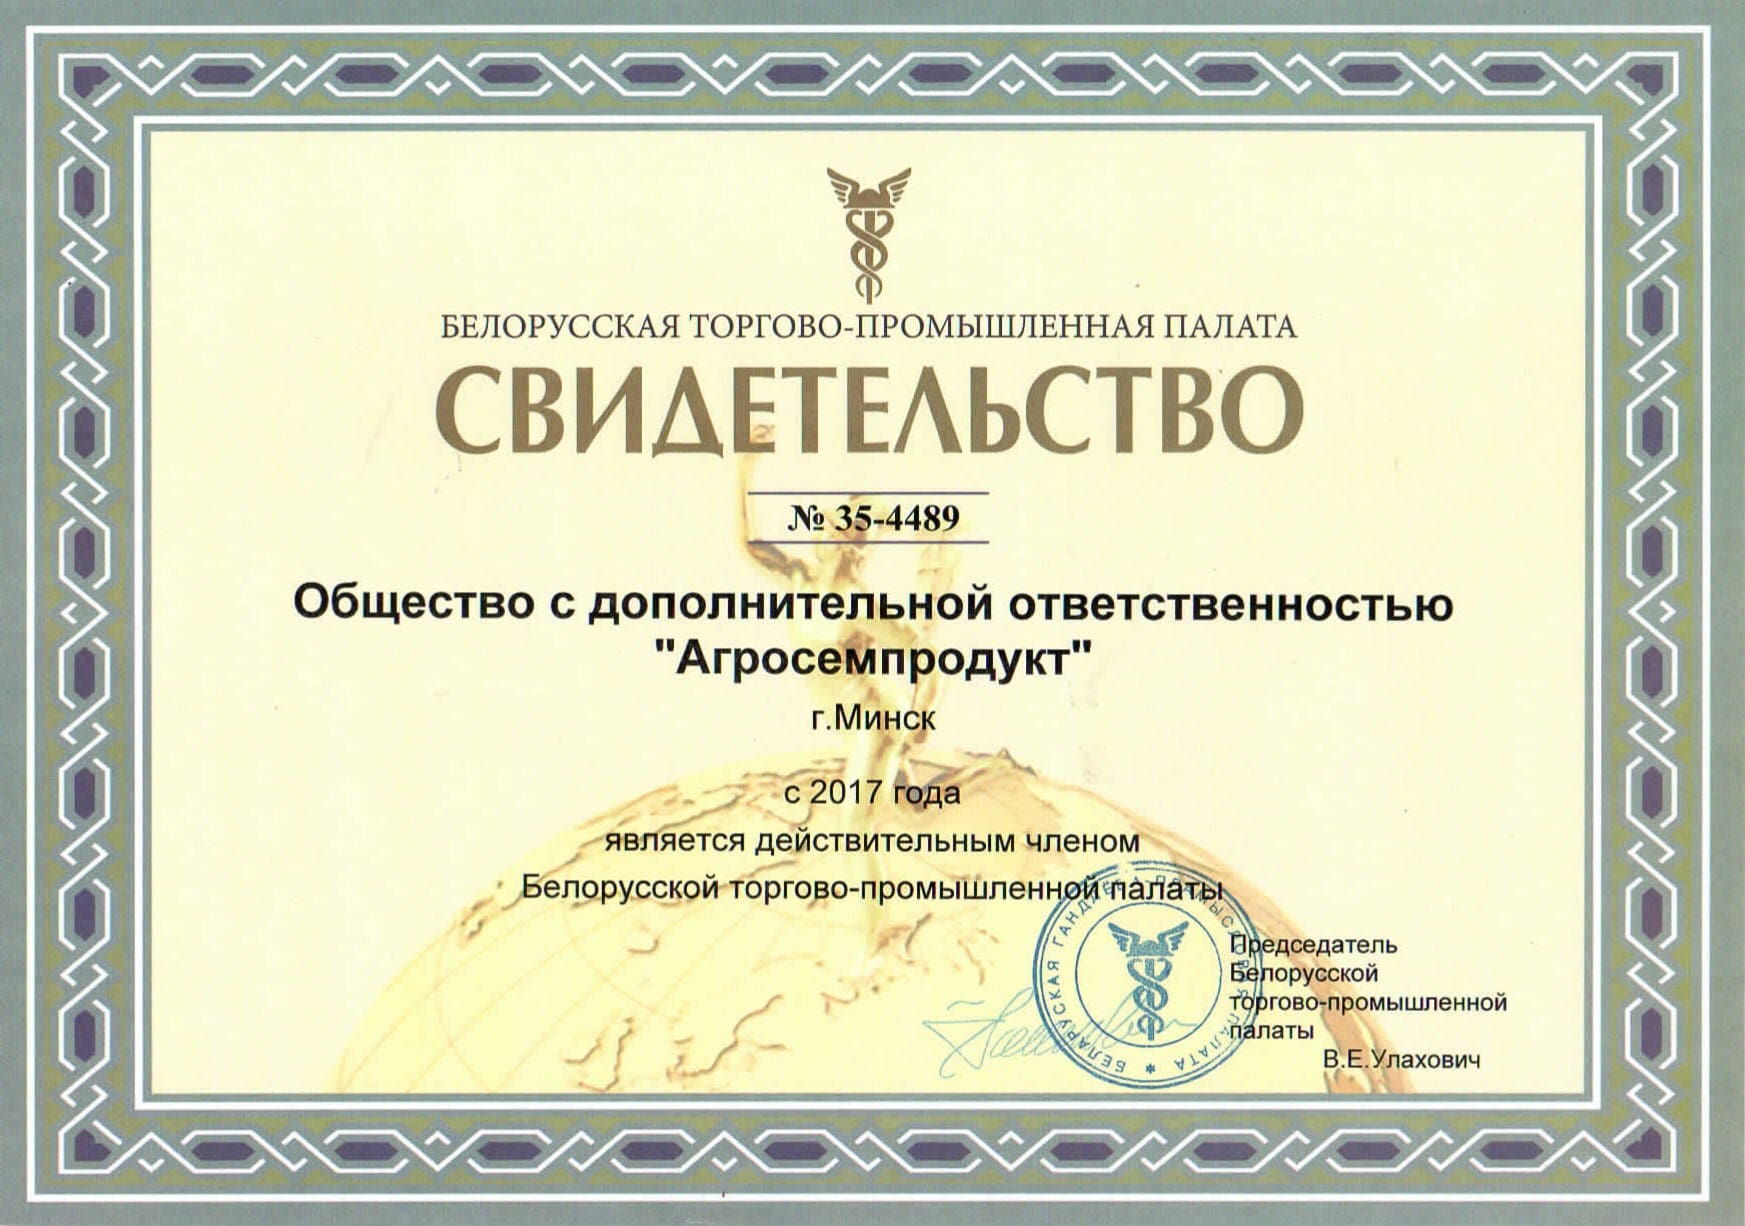 Membership in the Belarusian Chamber of Commerce and Industry